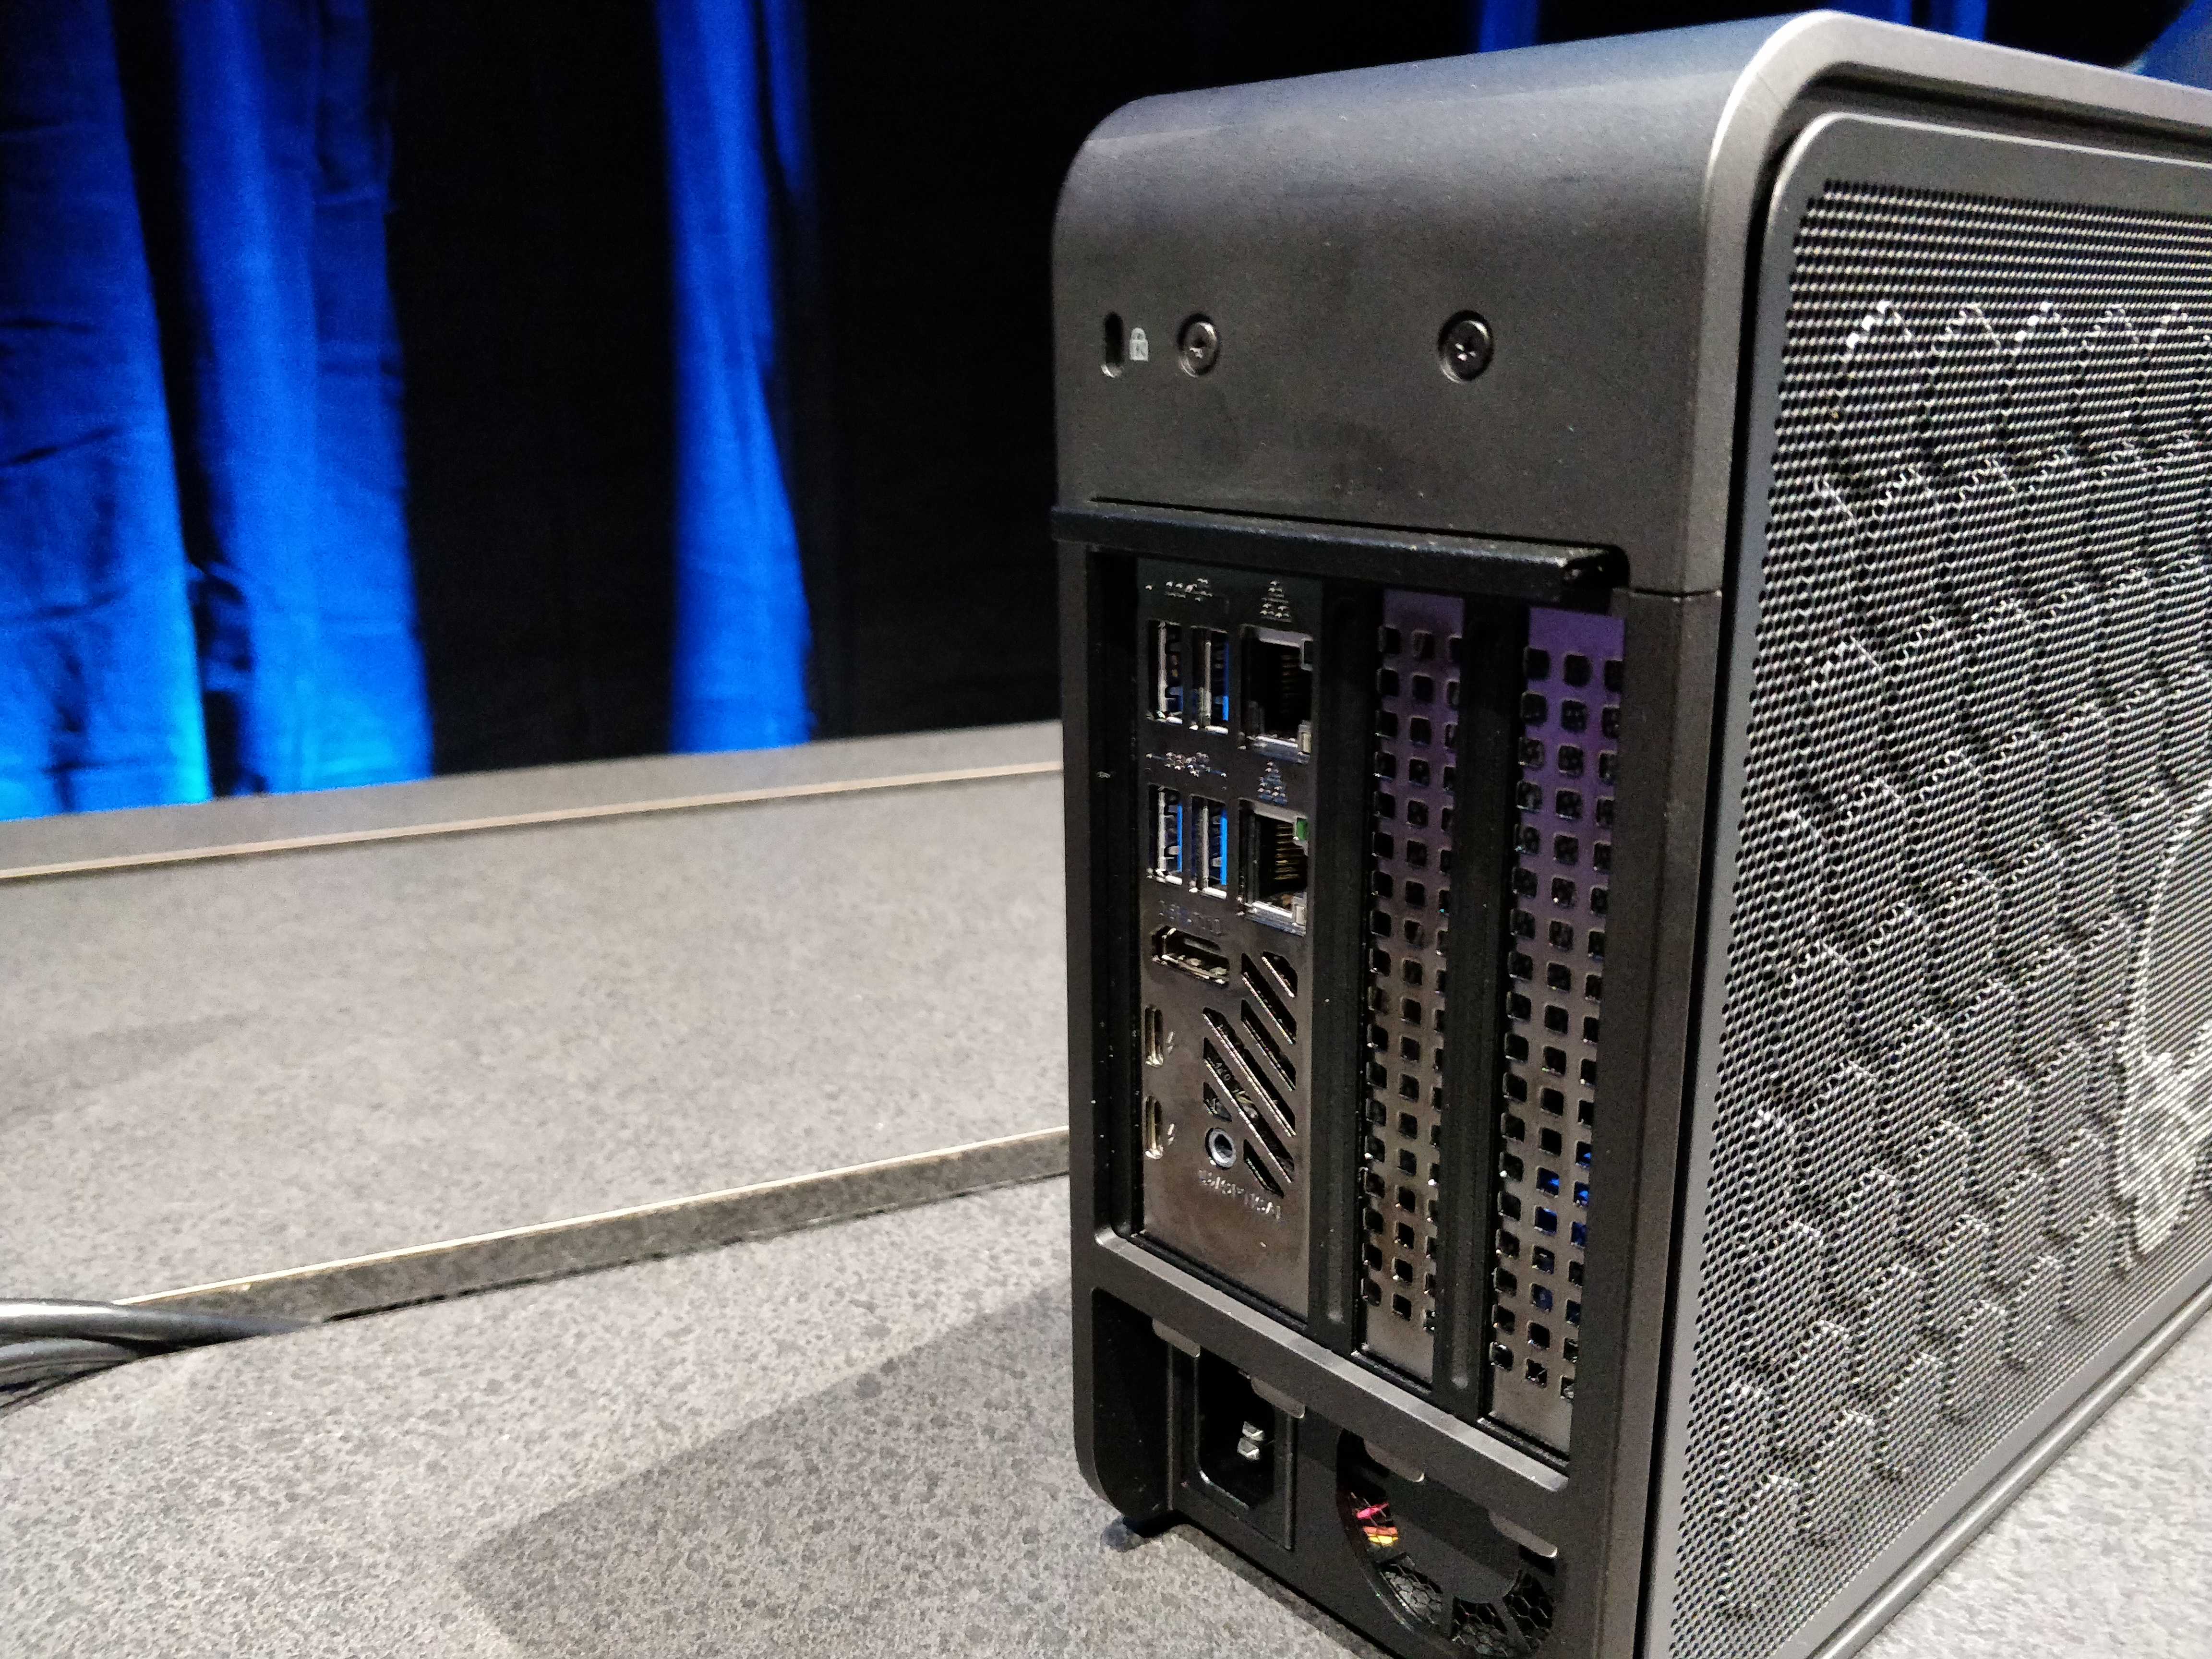 Introducing the Intel NUC 9 Compute Elements, Mini PC Kits, and